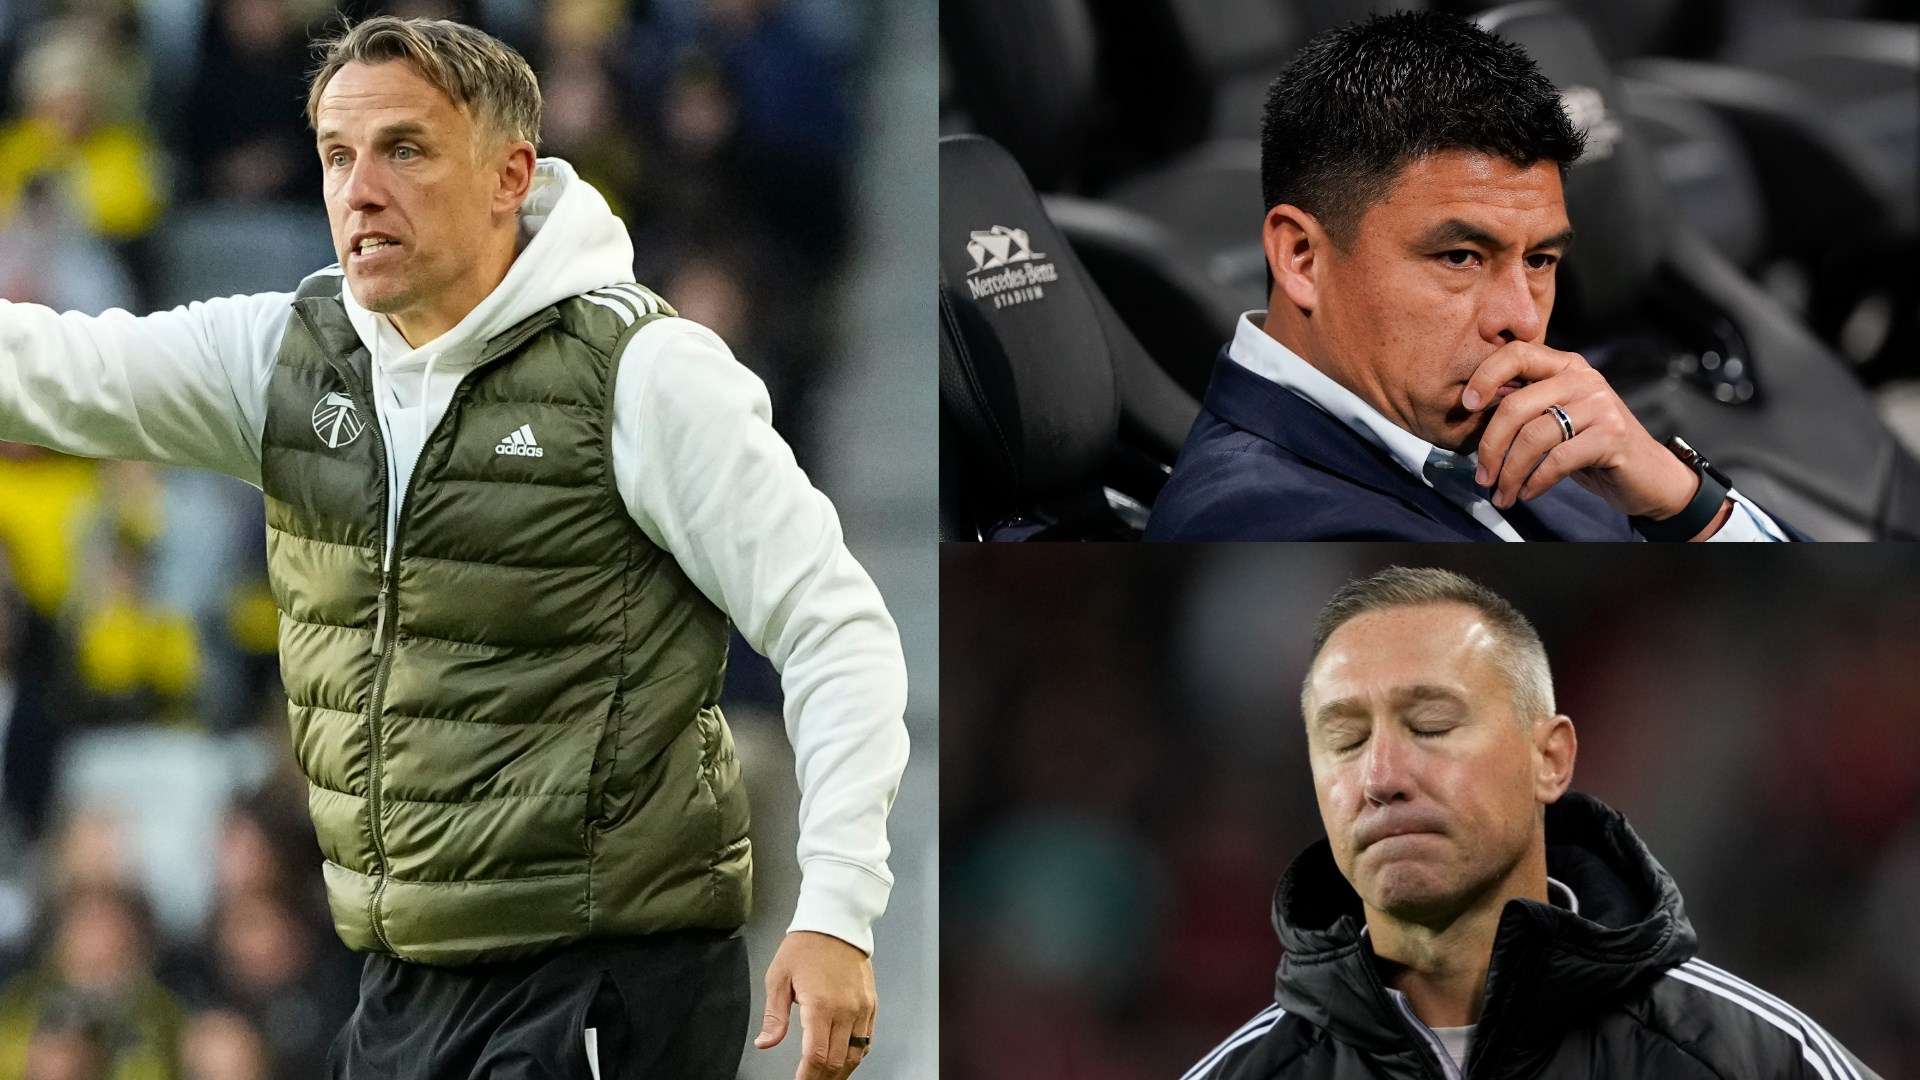 MLS managers Hot seat split